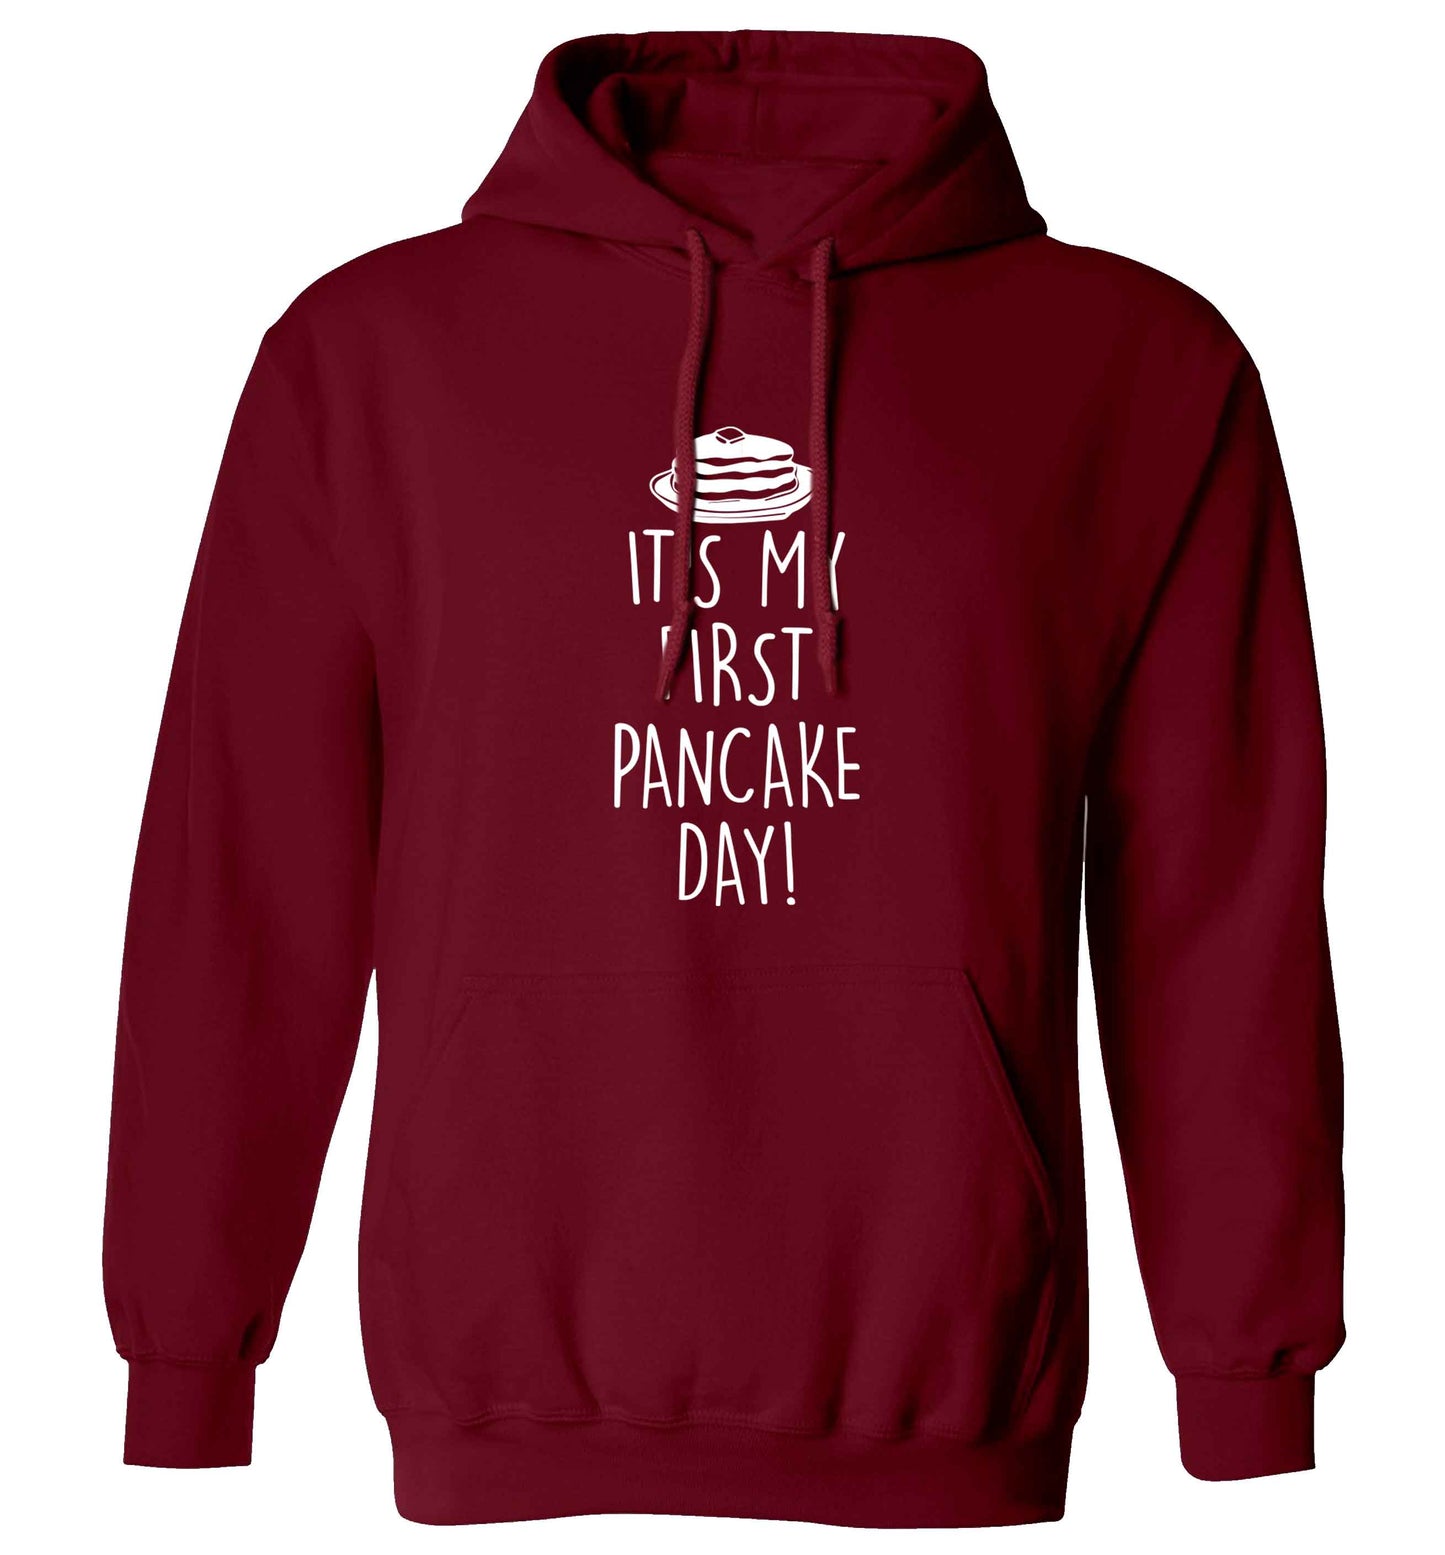 It's my first pancake day adults unisex maroon hoodie 2XL